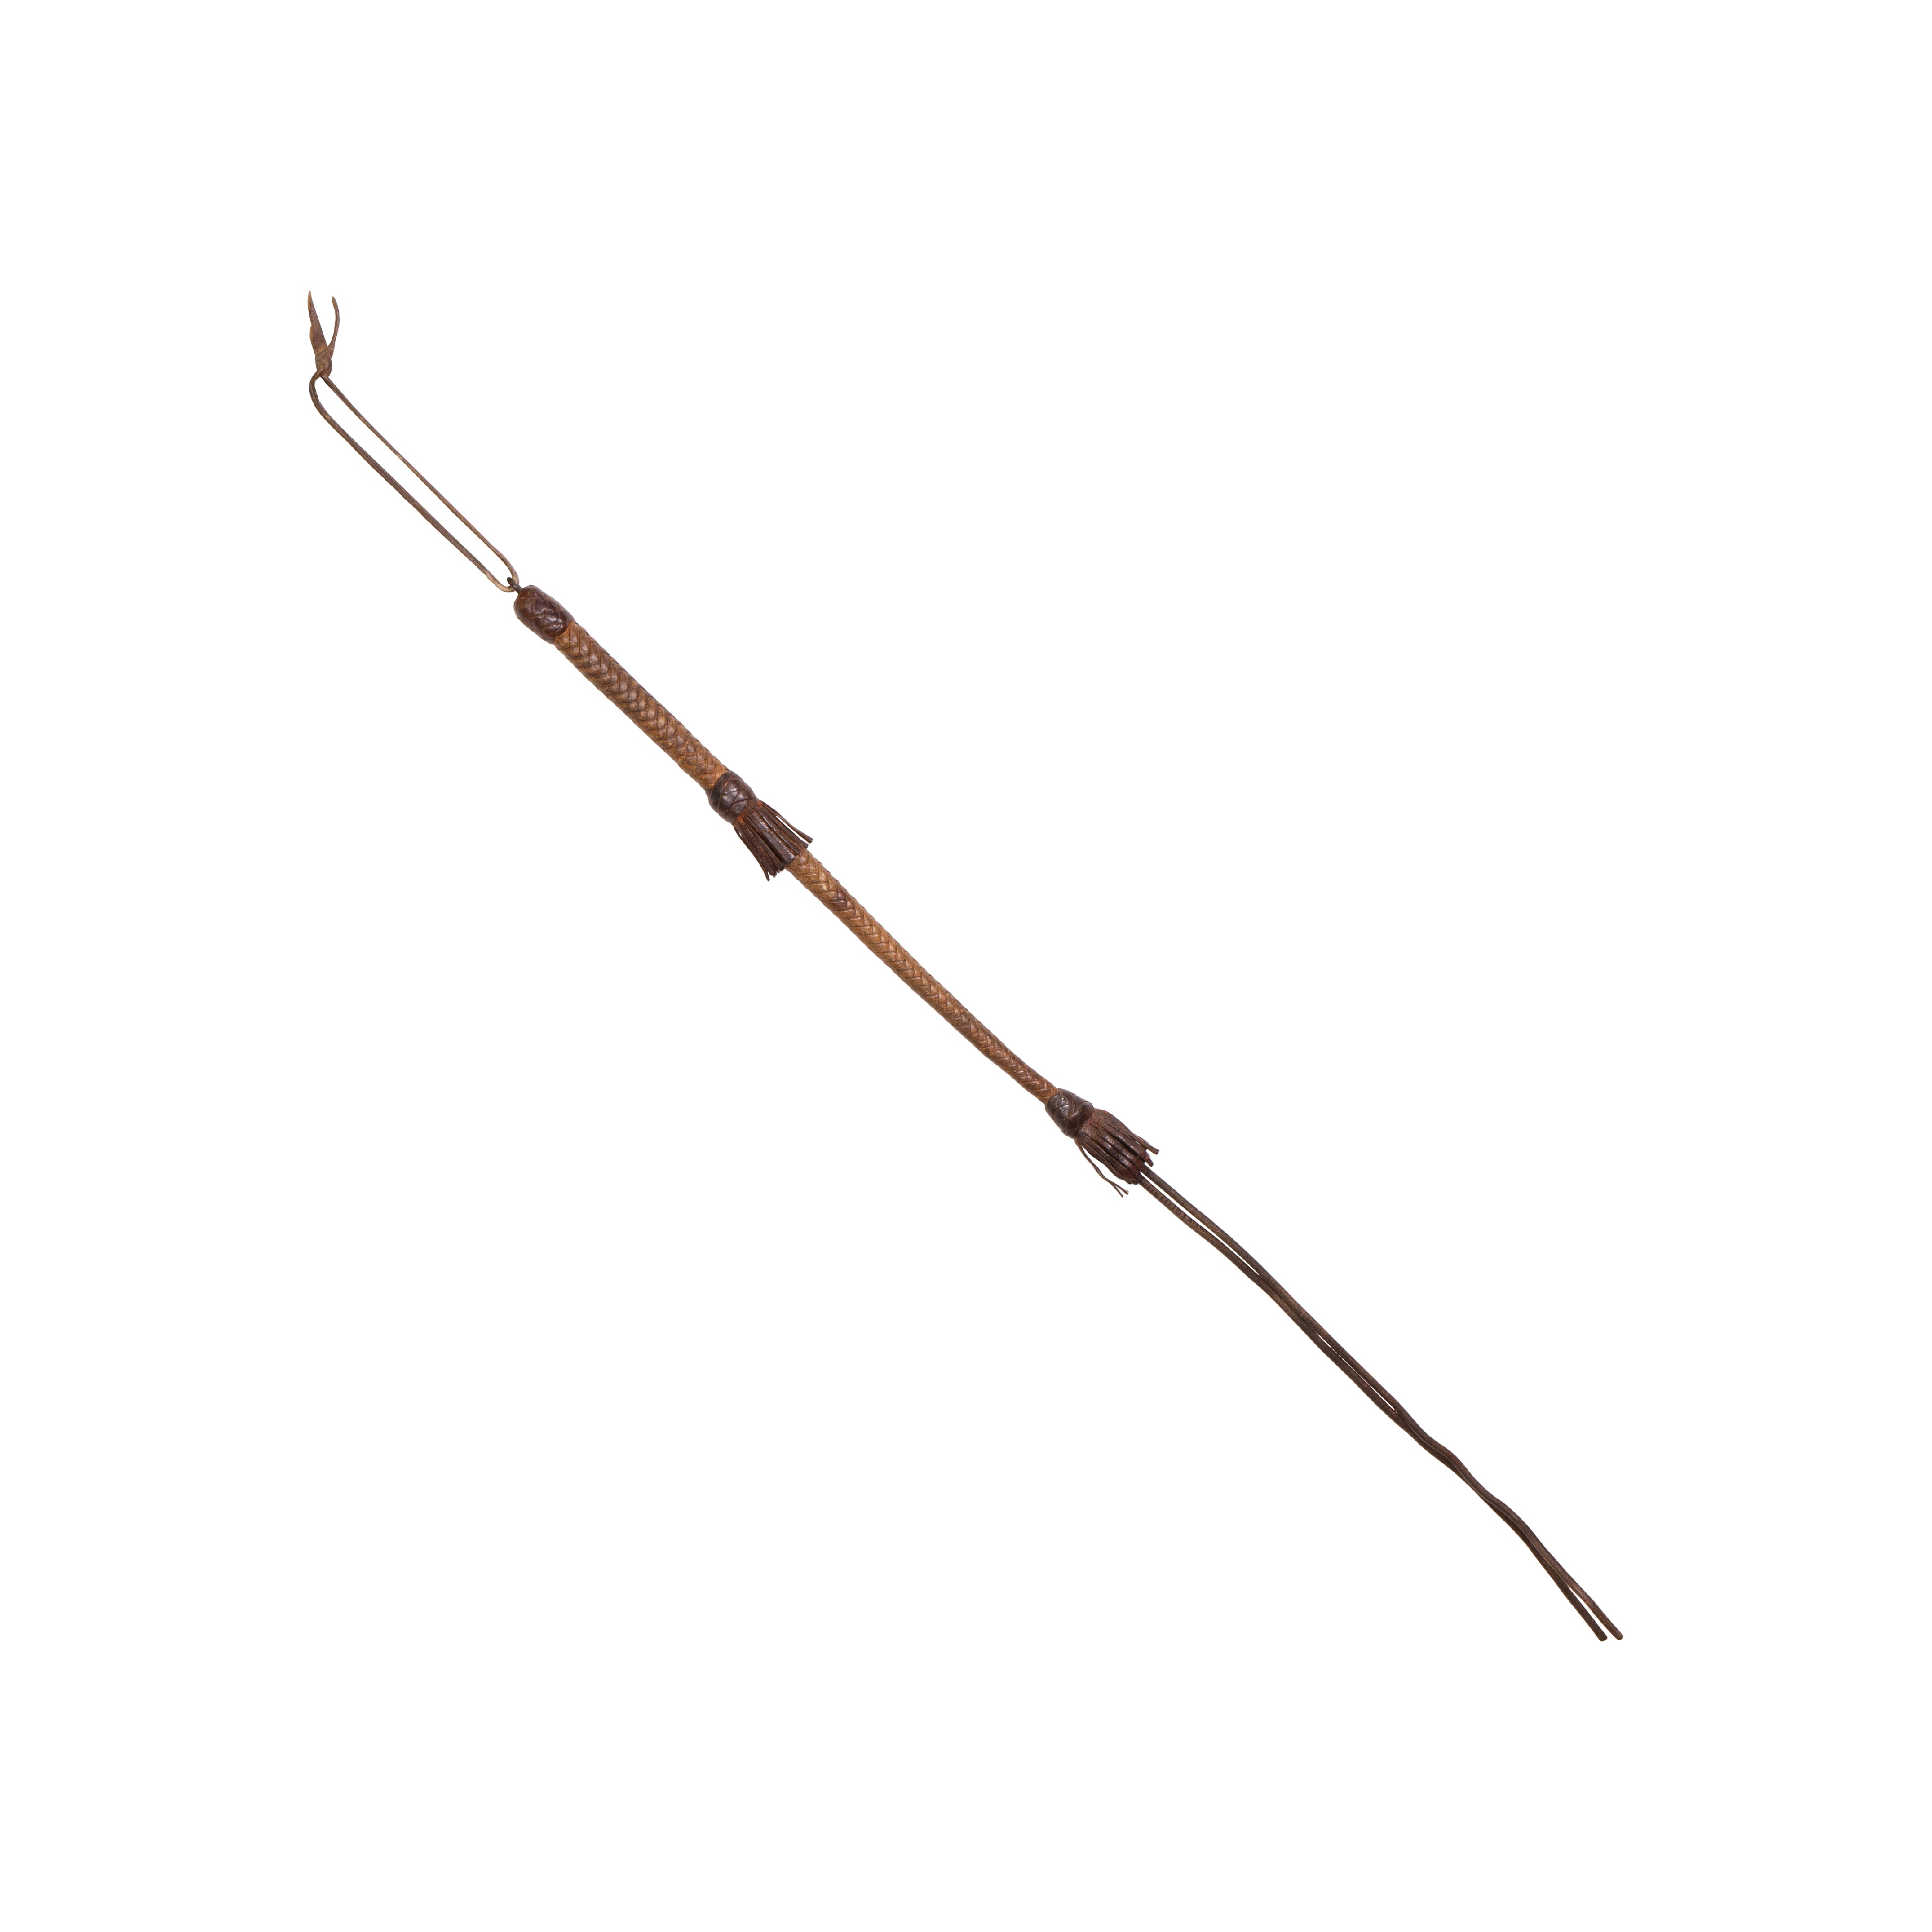 Leather Quirt, Western, Horse Gear, Quirt